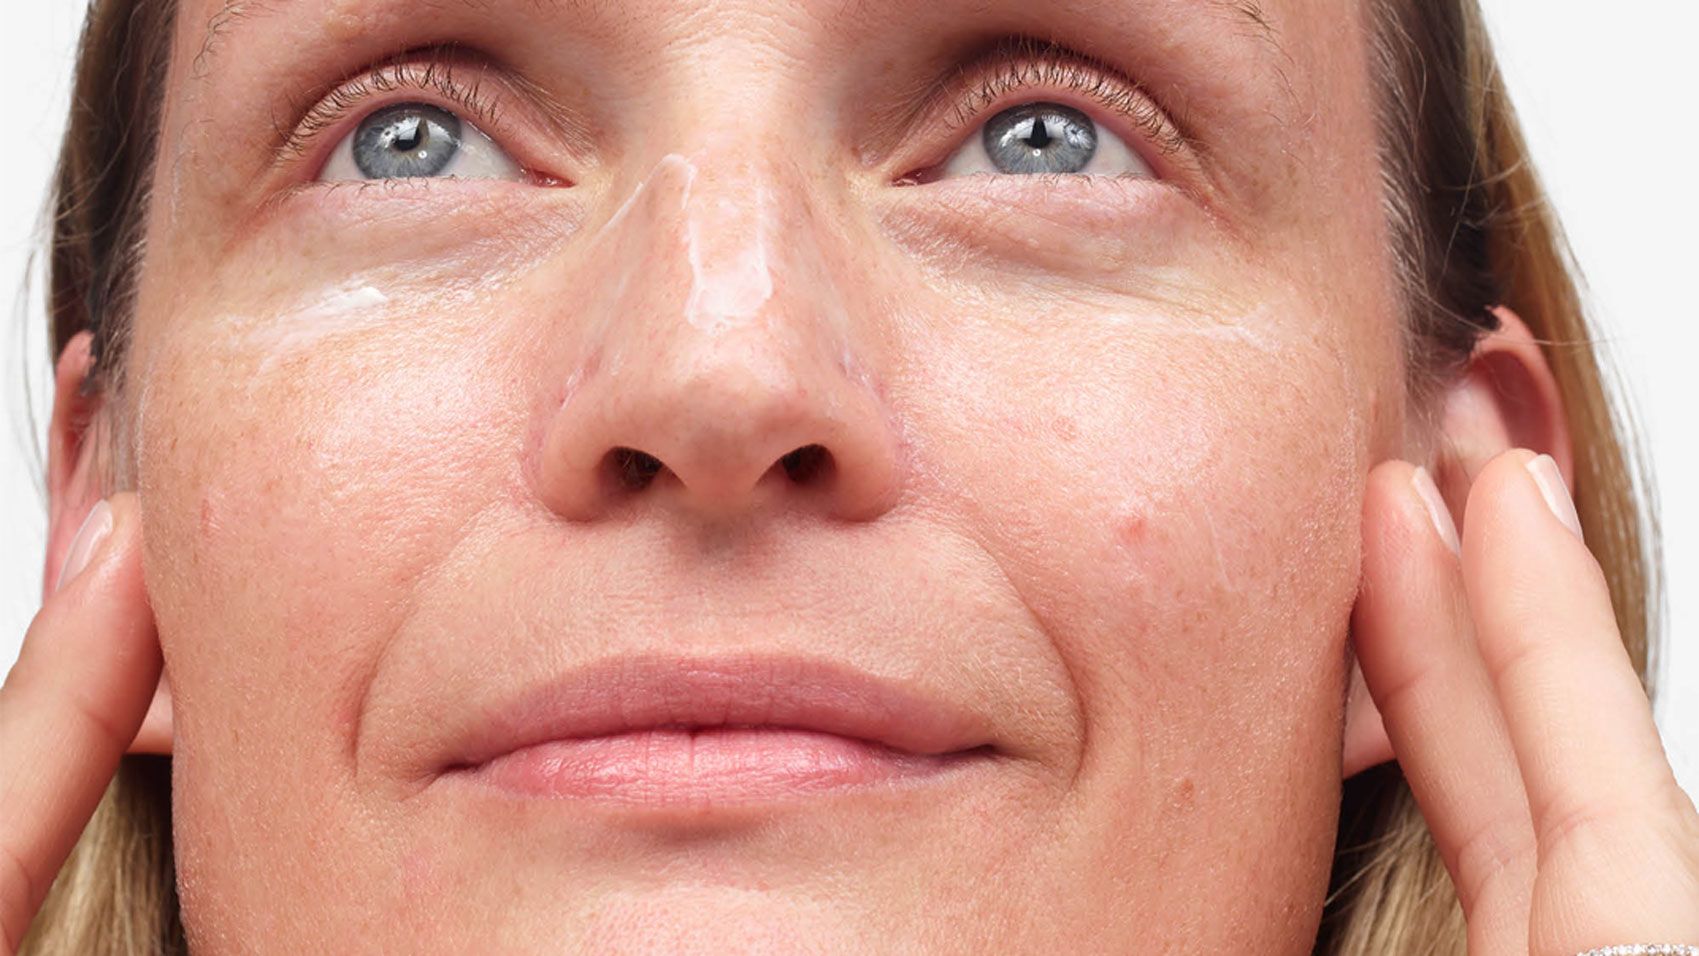 Dermatologist-recommended skin care for people over 50